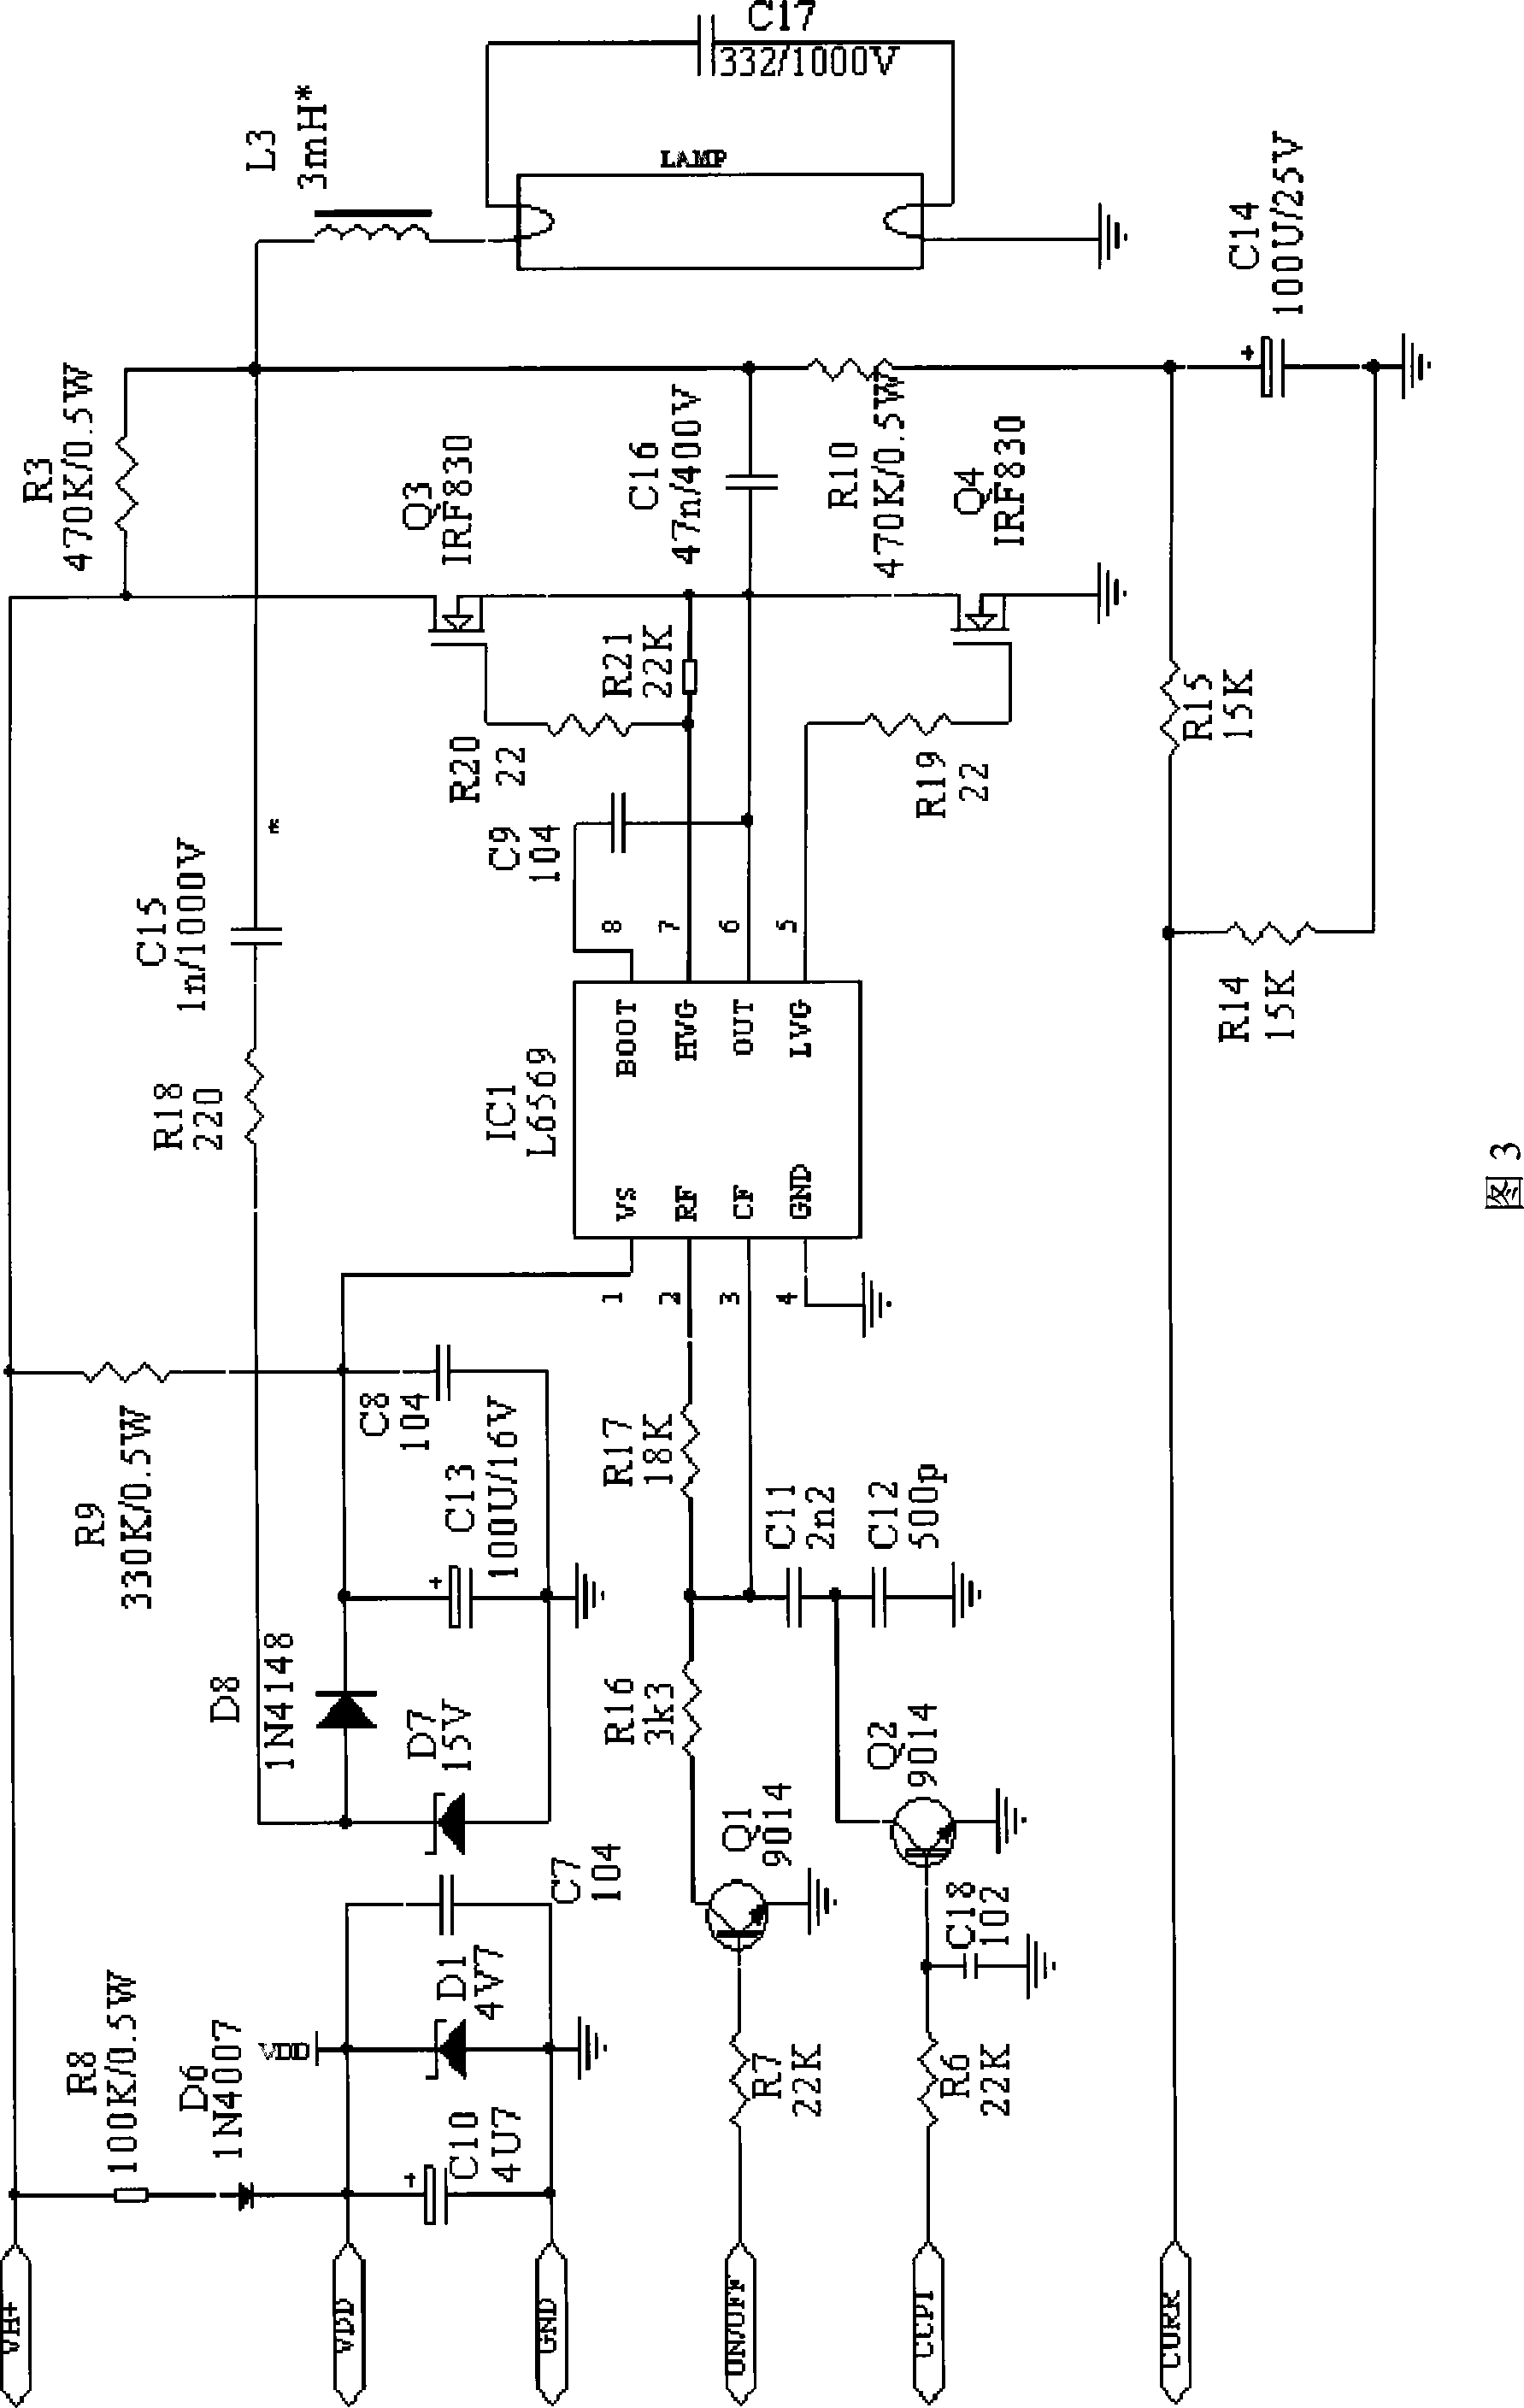 A dual-frequency mixed spectrum type and pulse width regulation type dimming electronic ballast